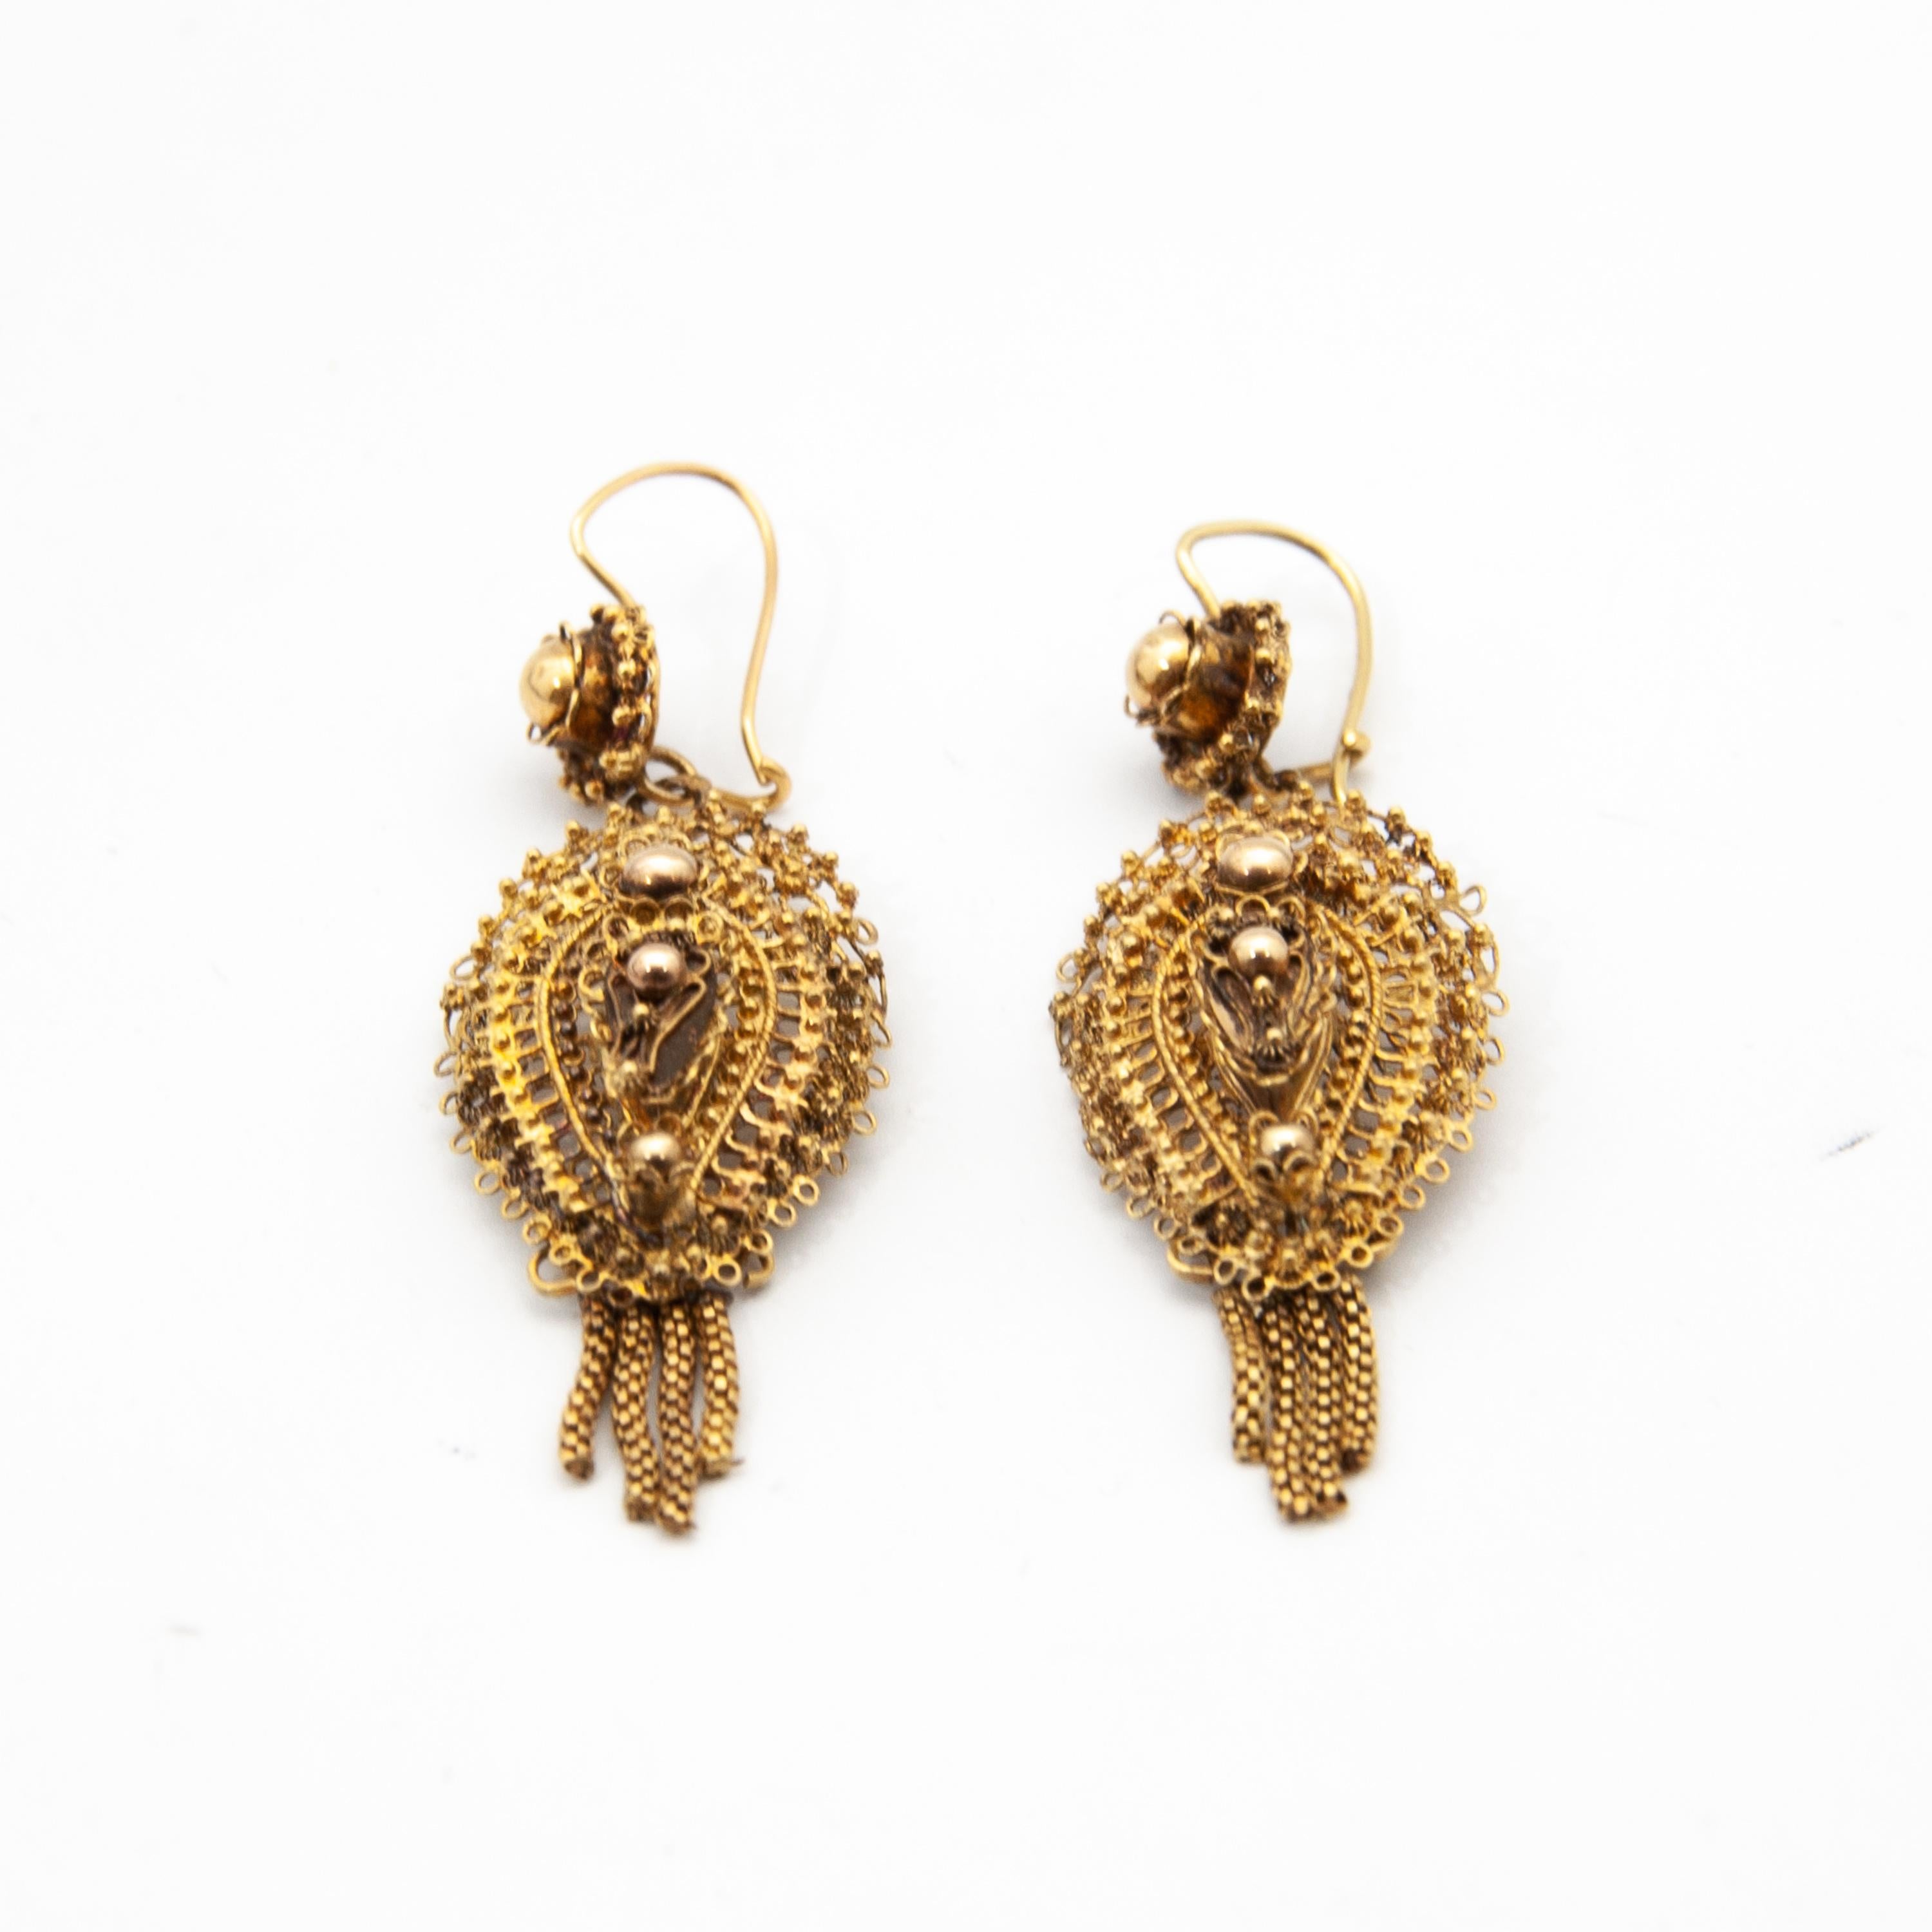 Antique 1880's 14K Gold Filigree Earrings and Brooch In Good Condition For Sale In Rotterdam, NL